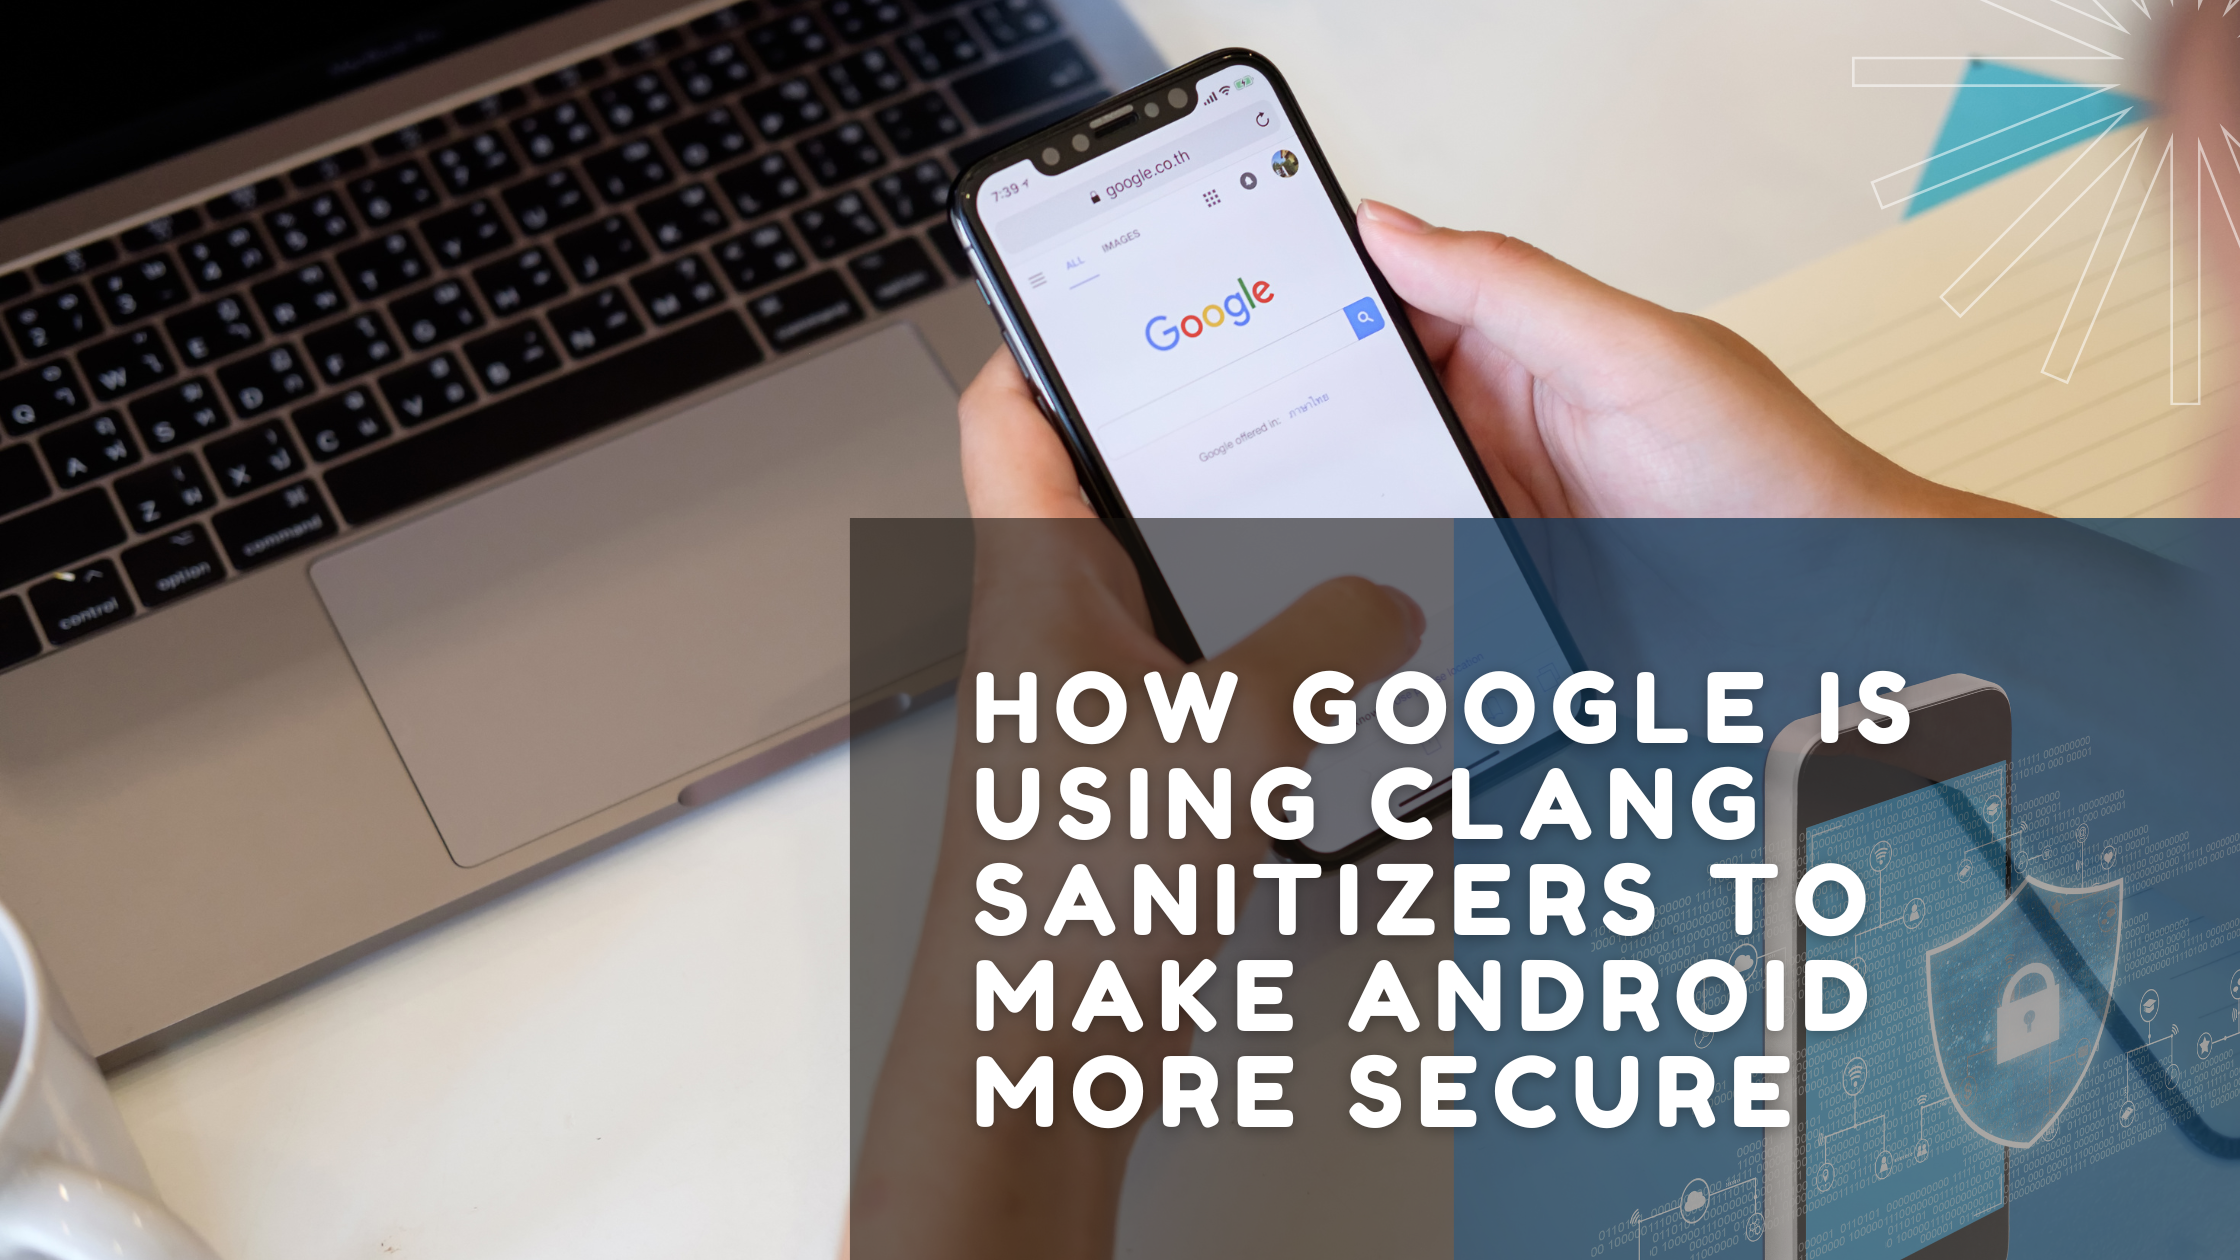 How Google is Using Clang Sanitizers to Make Android More Secure